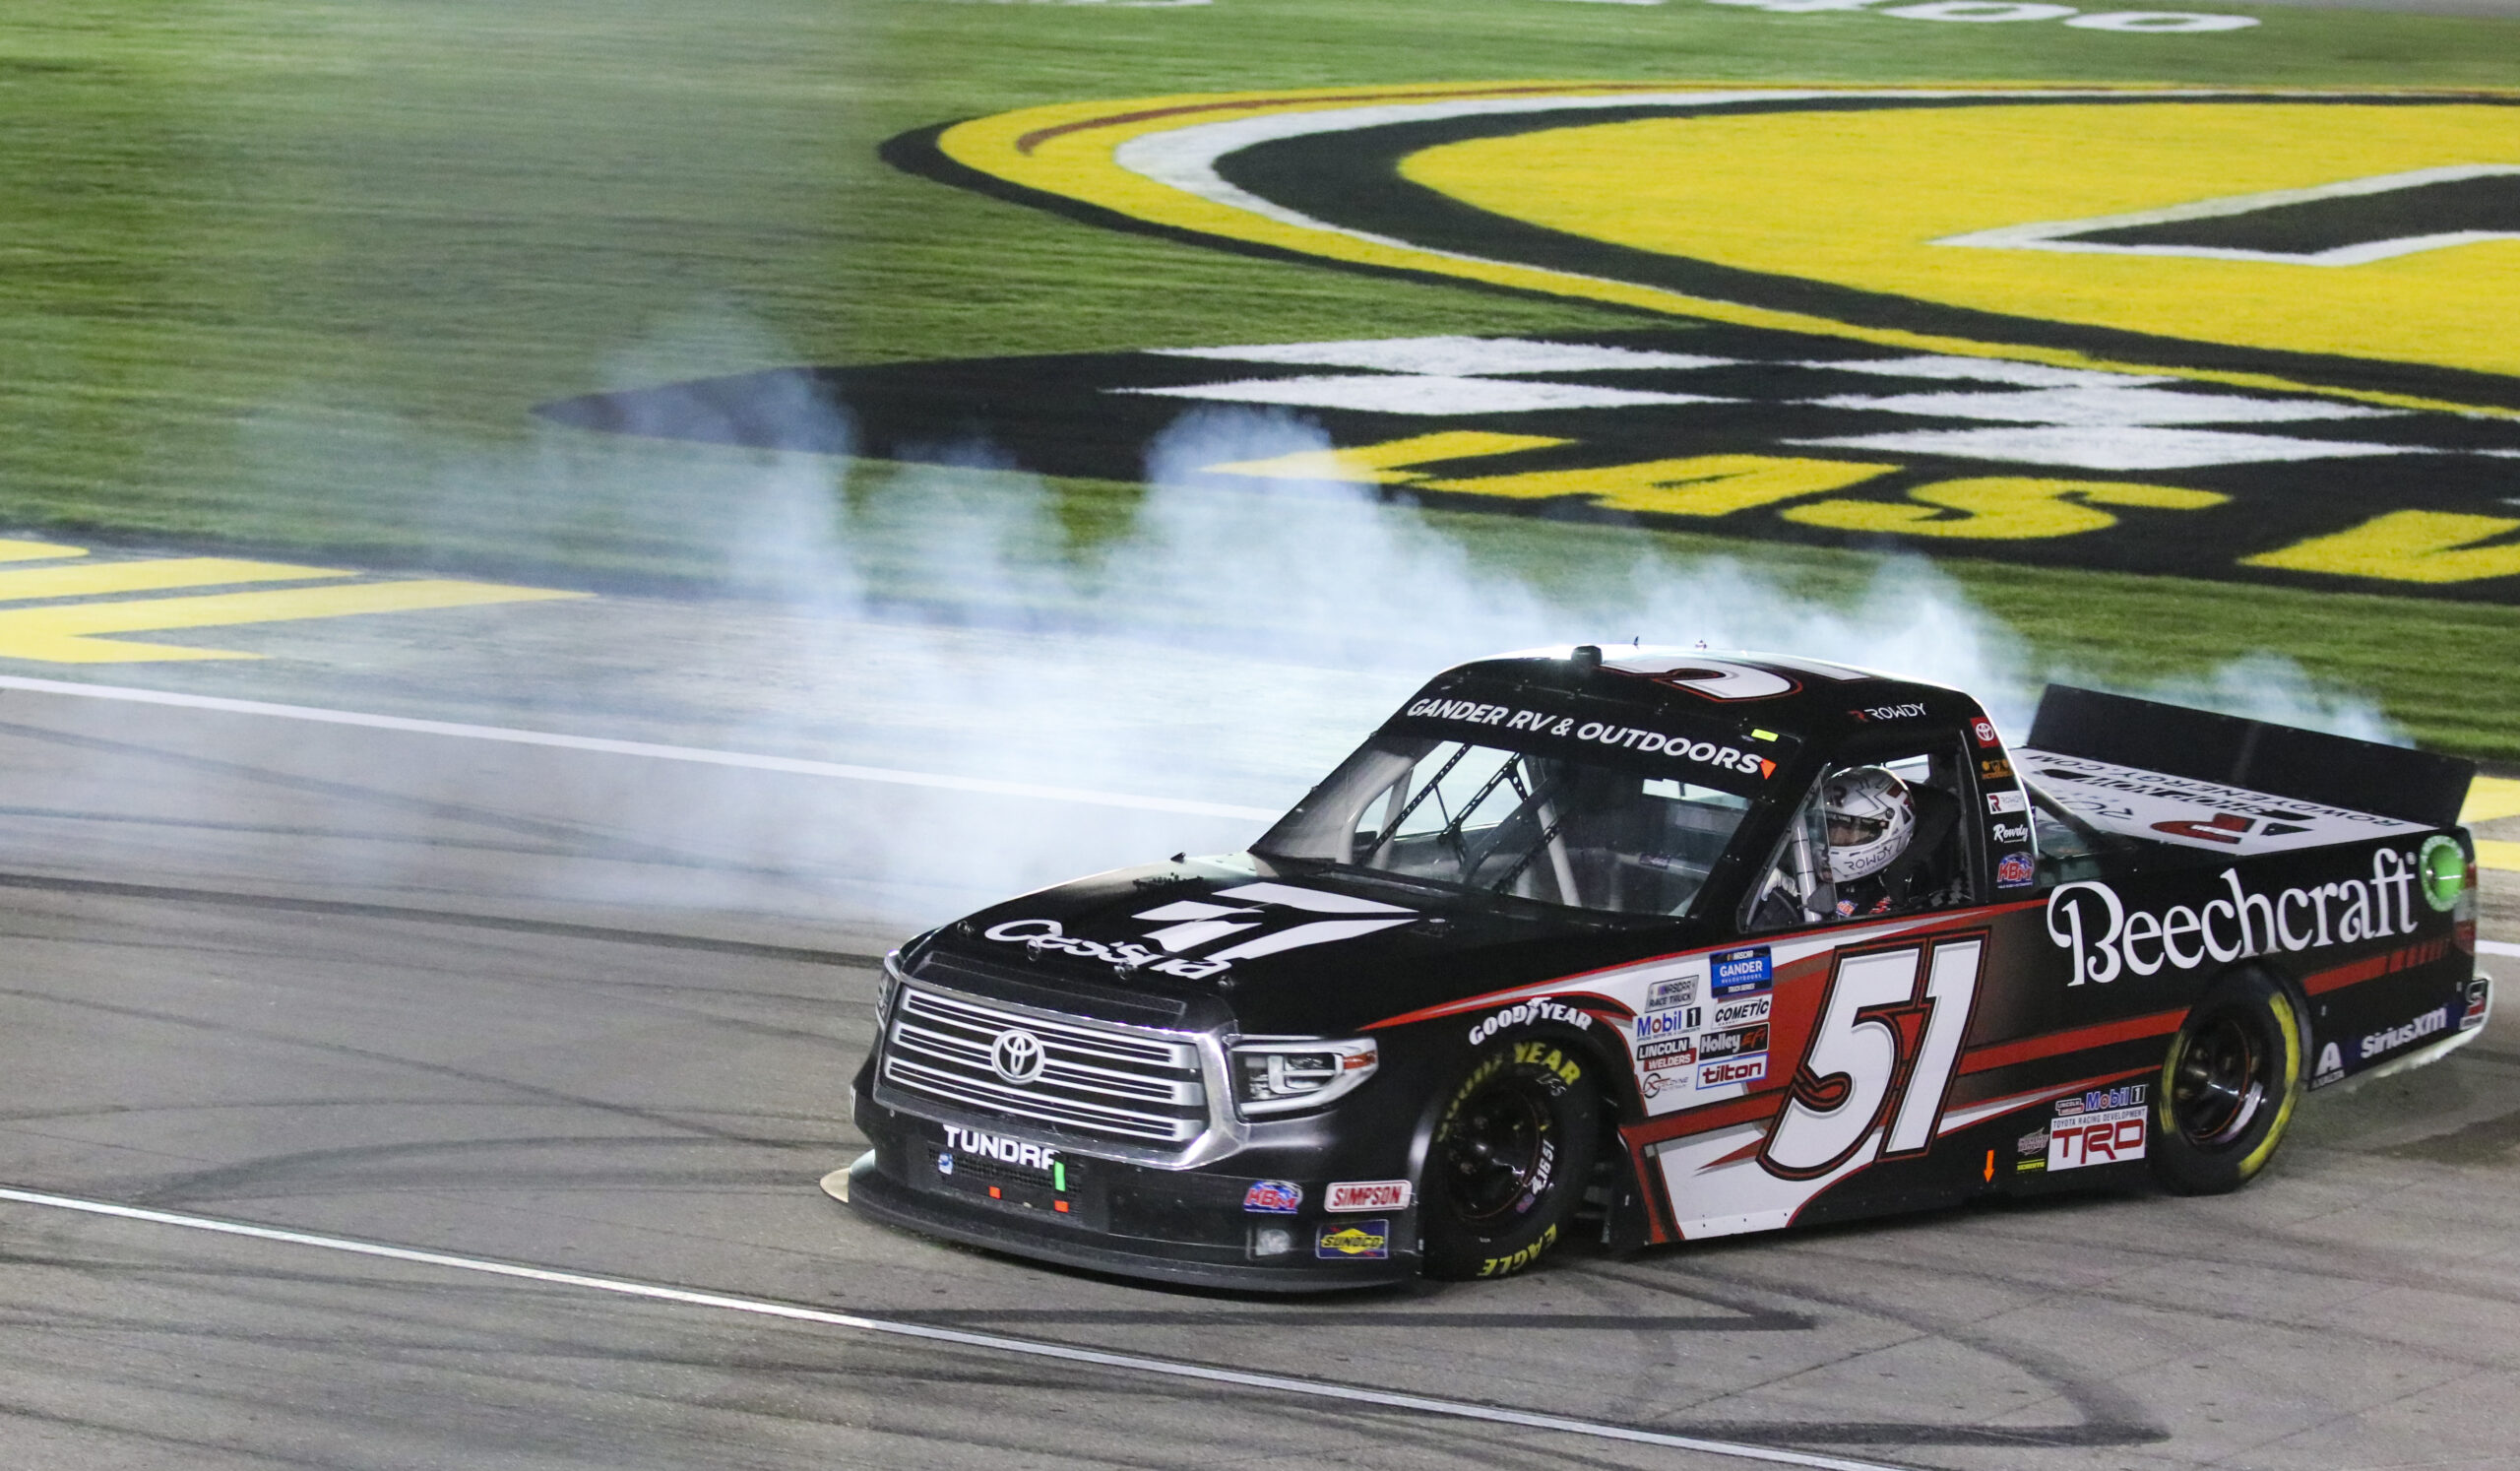 Kyle Busch earns dominant Truck Series win at Las Vegas